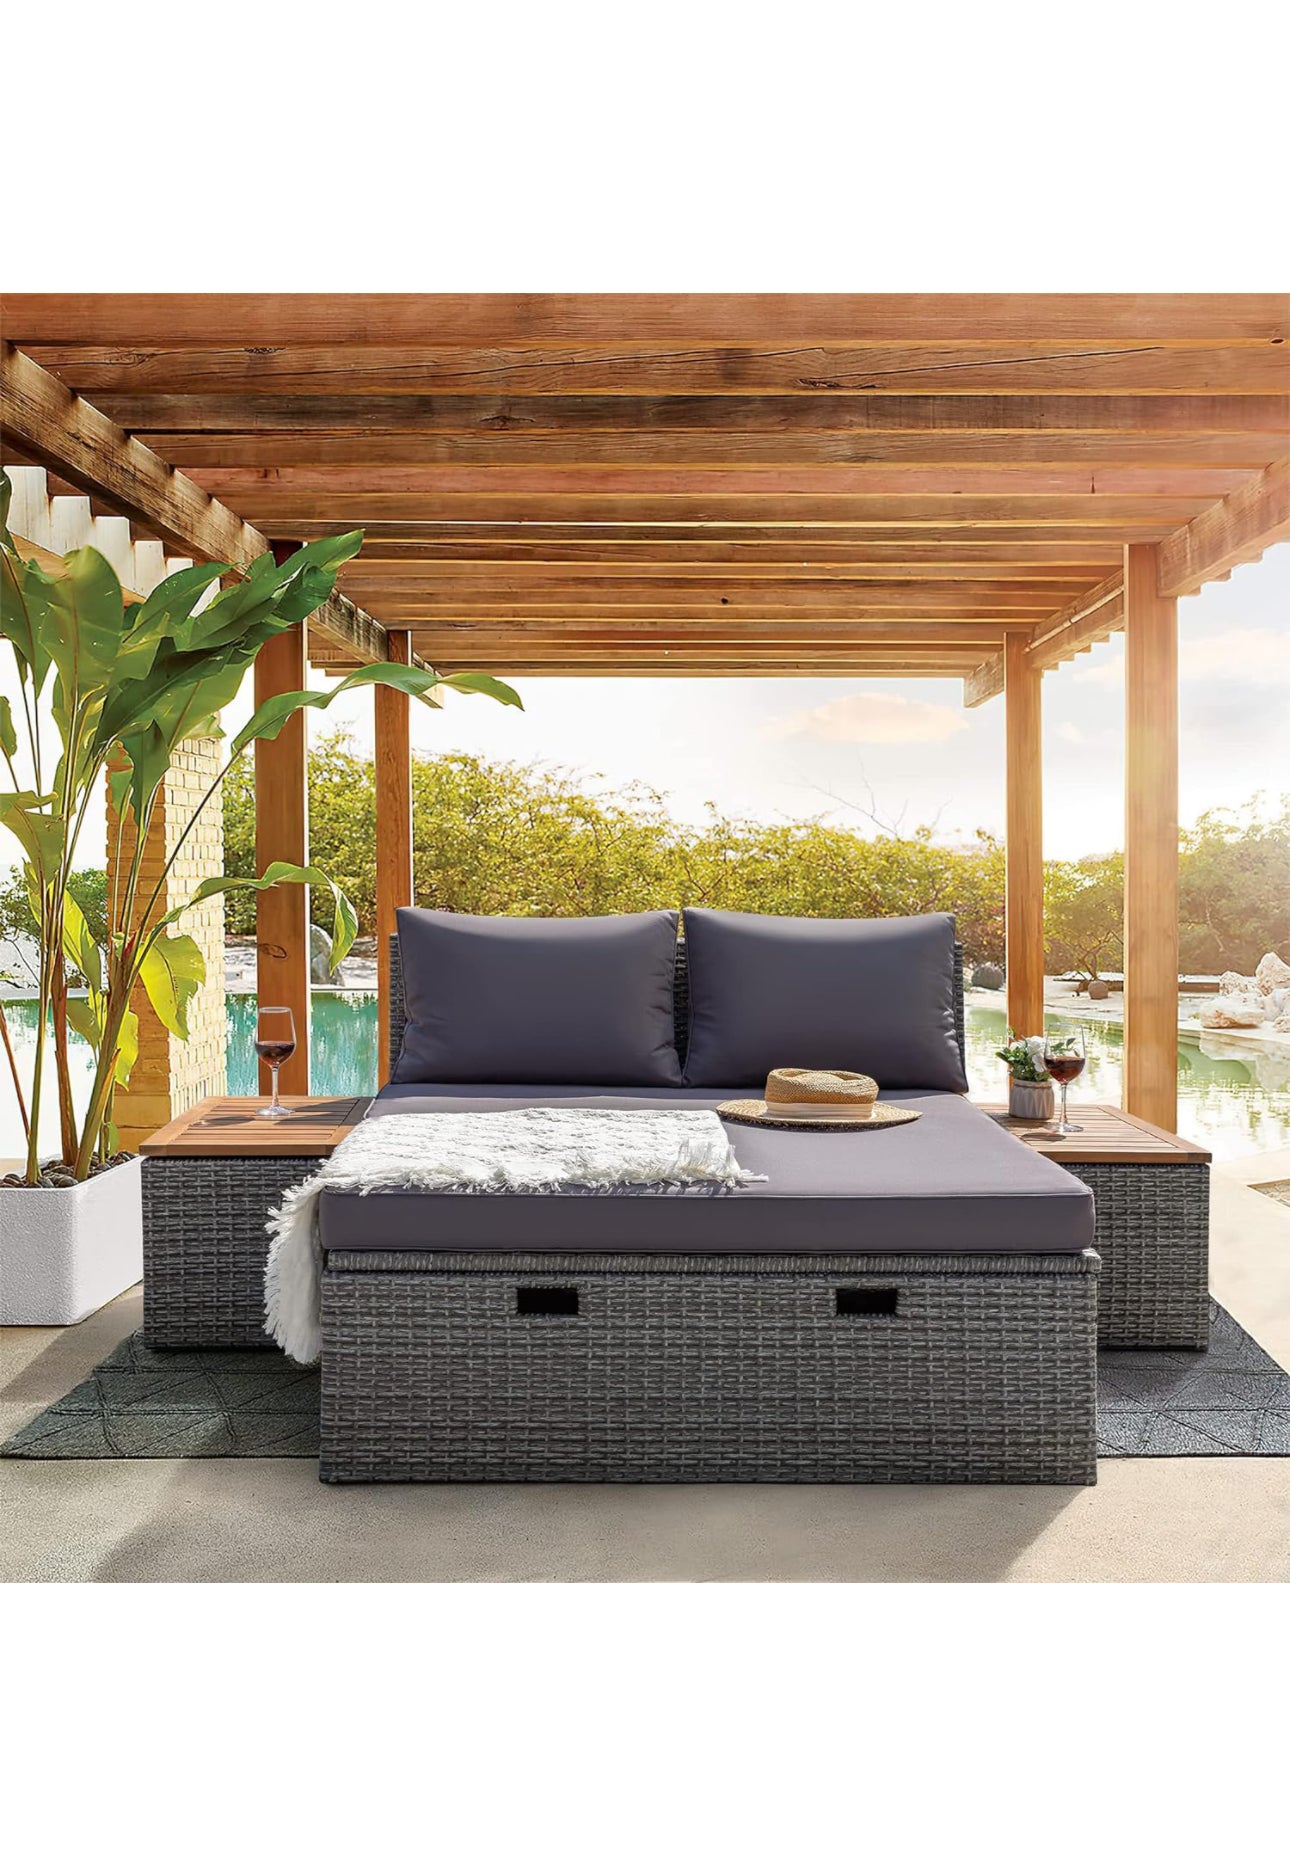 Outdoor patio loveseat with lounge and storage 2 side tables modular